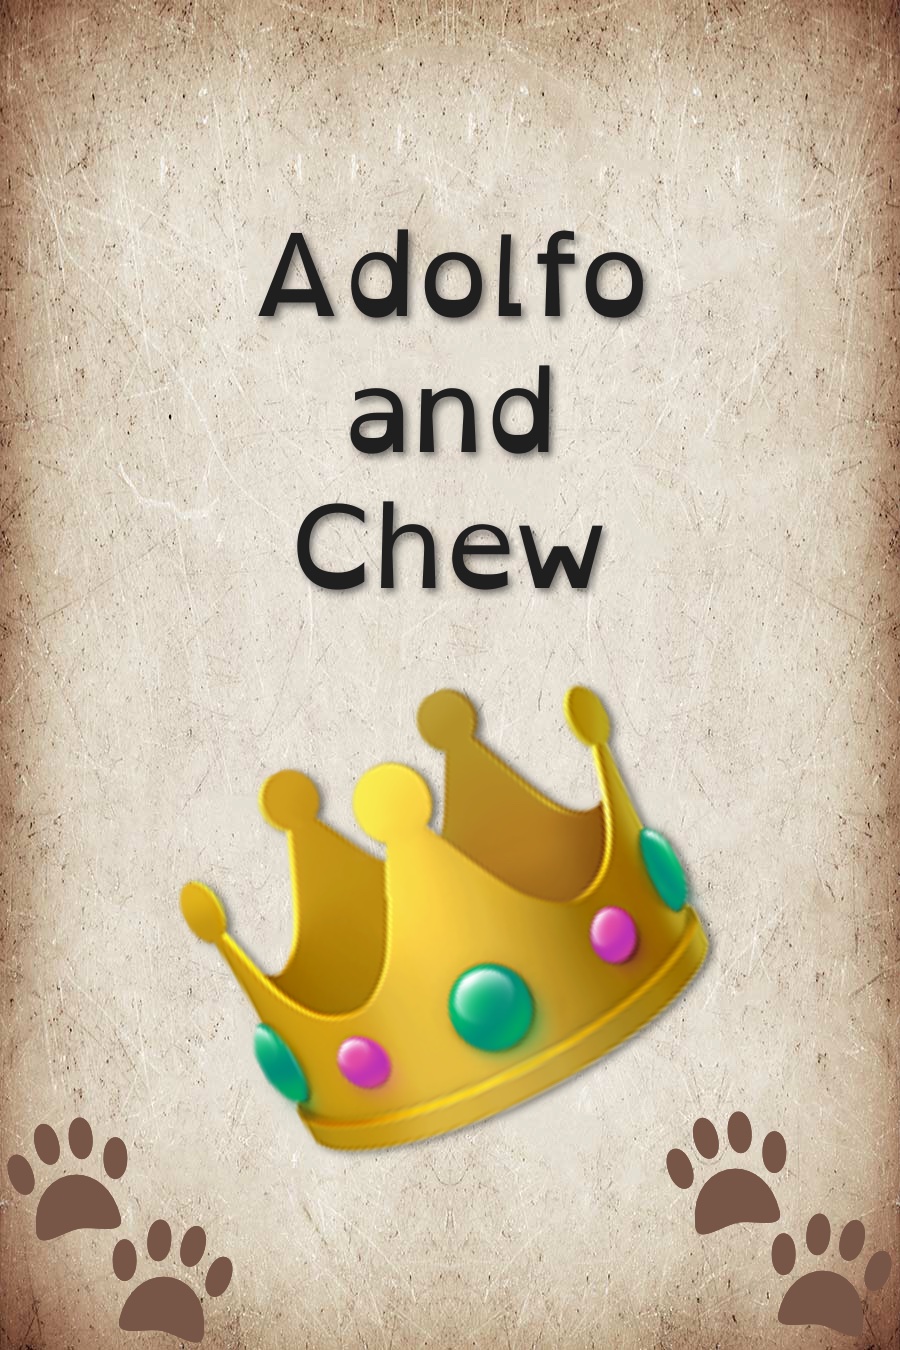 Adolfo and Chew by Bella P